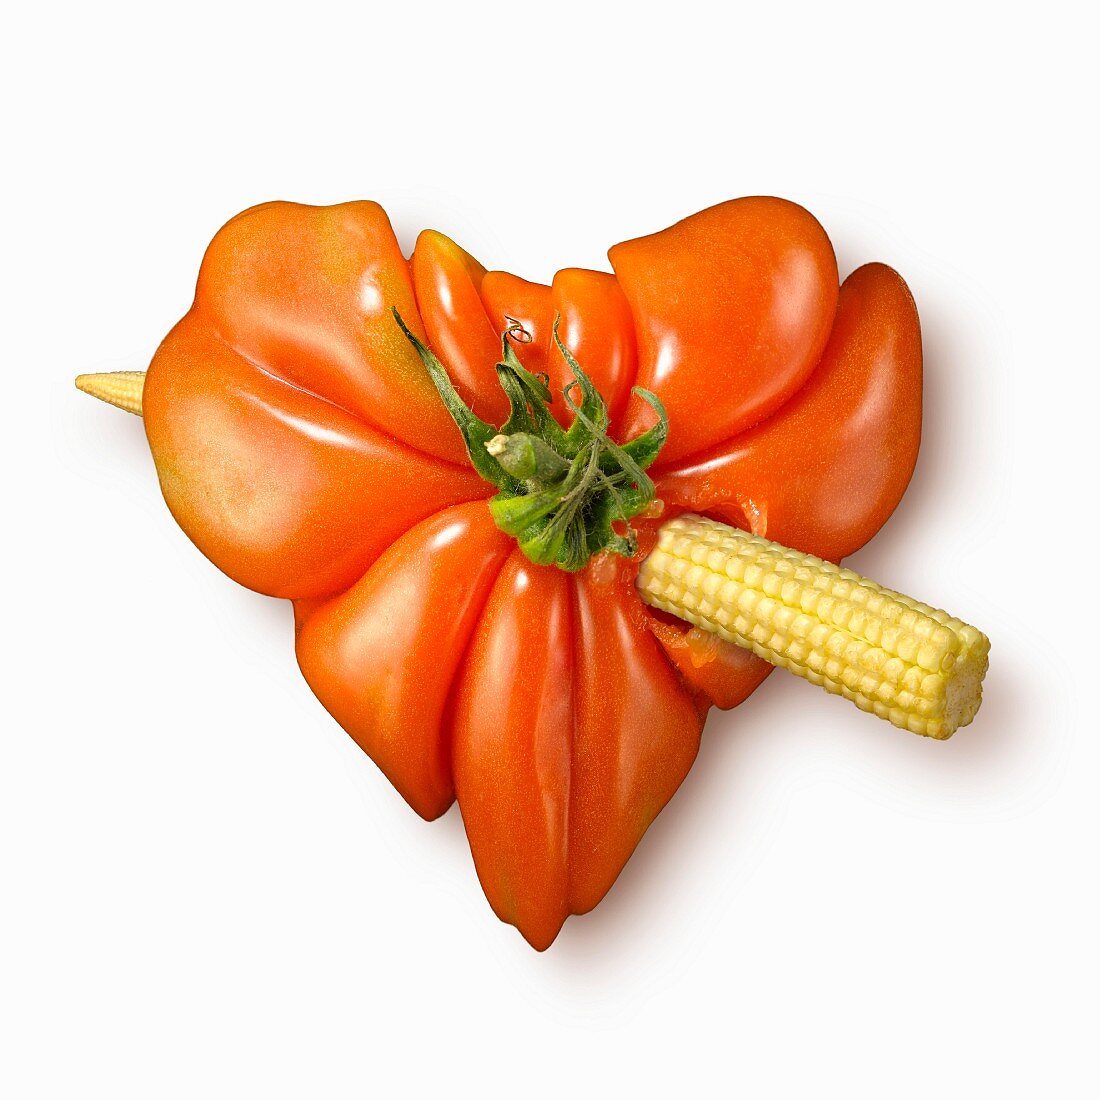 Cupid's heart made out of tomato and mini corn on the cob